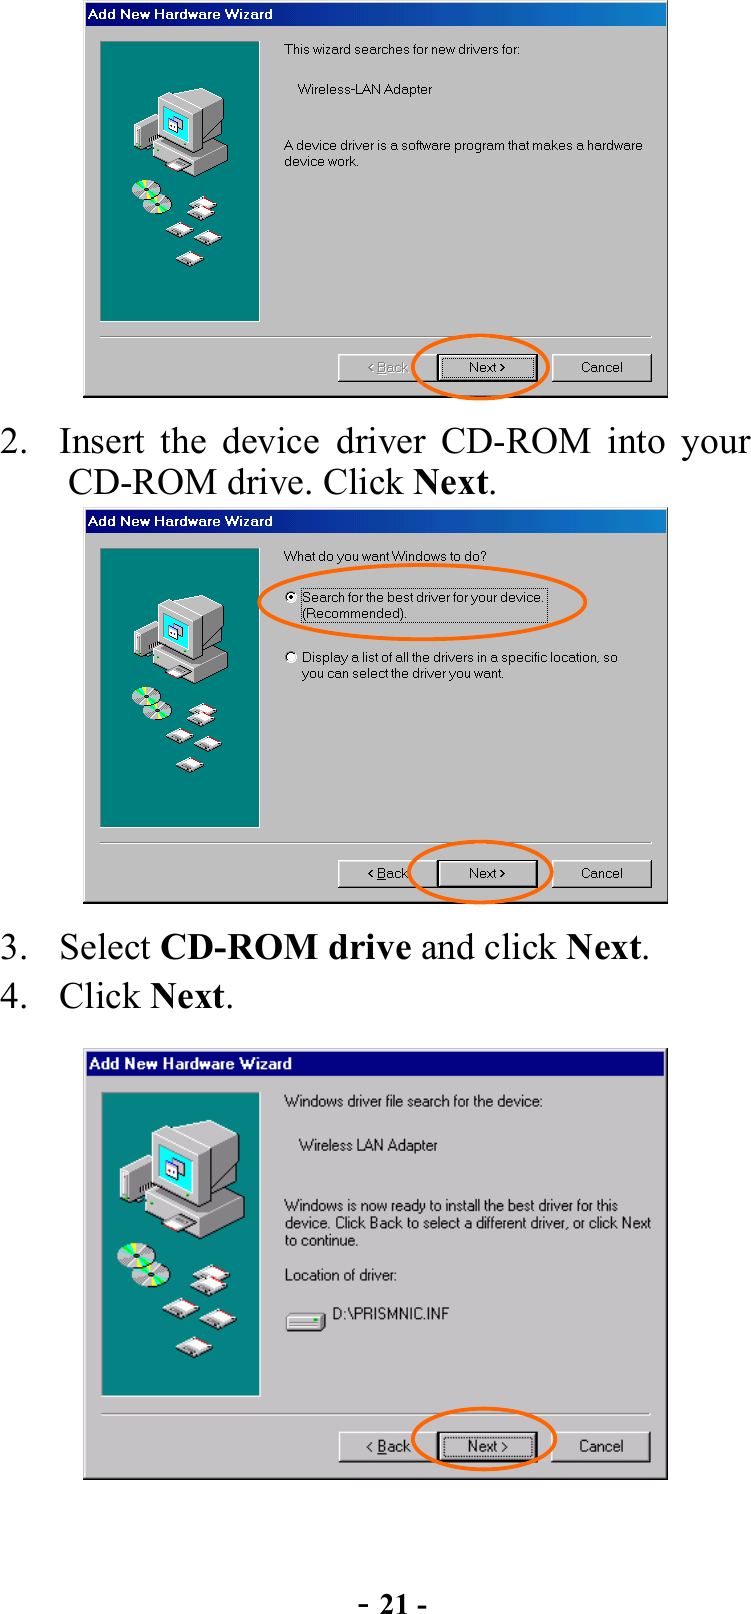  - 21 -  2.  Insert the device driver CD-ROM into your CD-ROM drive. Click Next.   3. Select CD-ROM drive and click Next. 4. Click Next.  